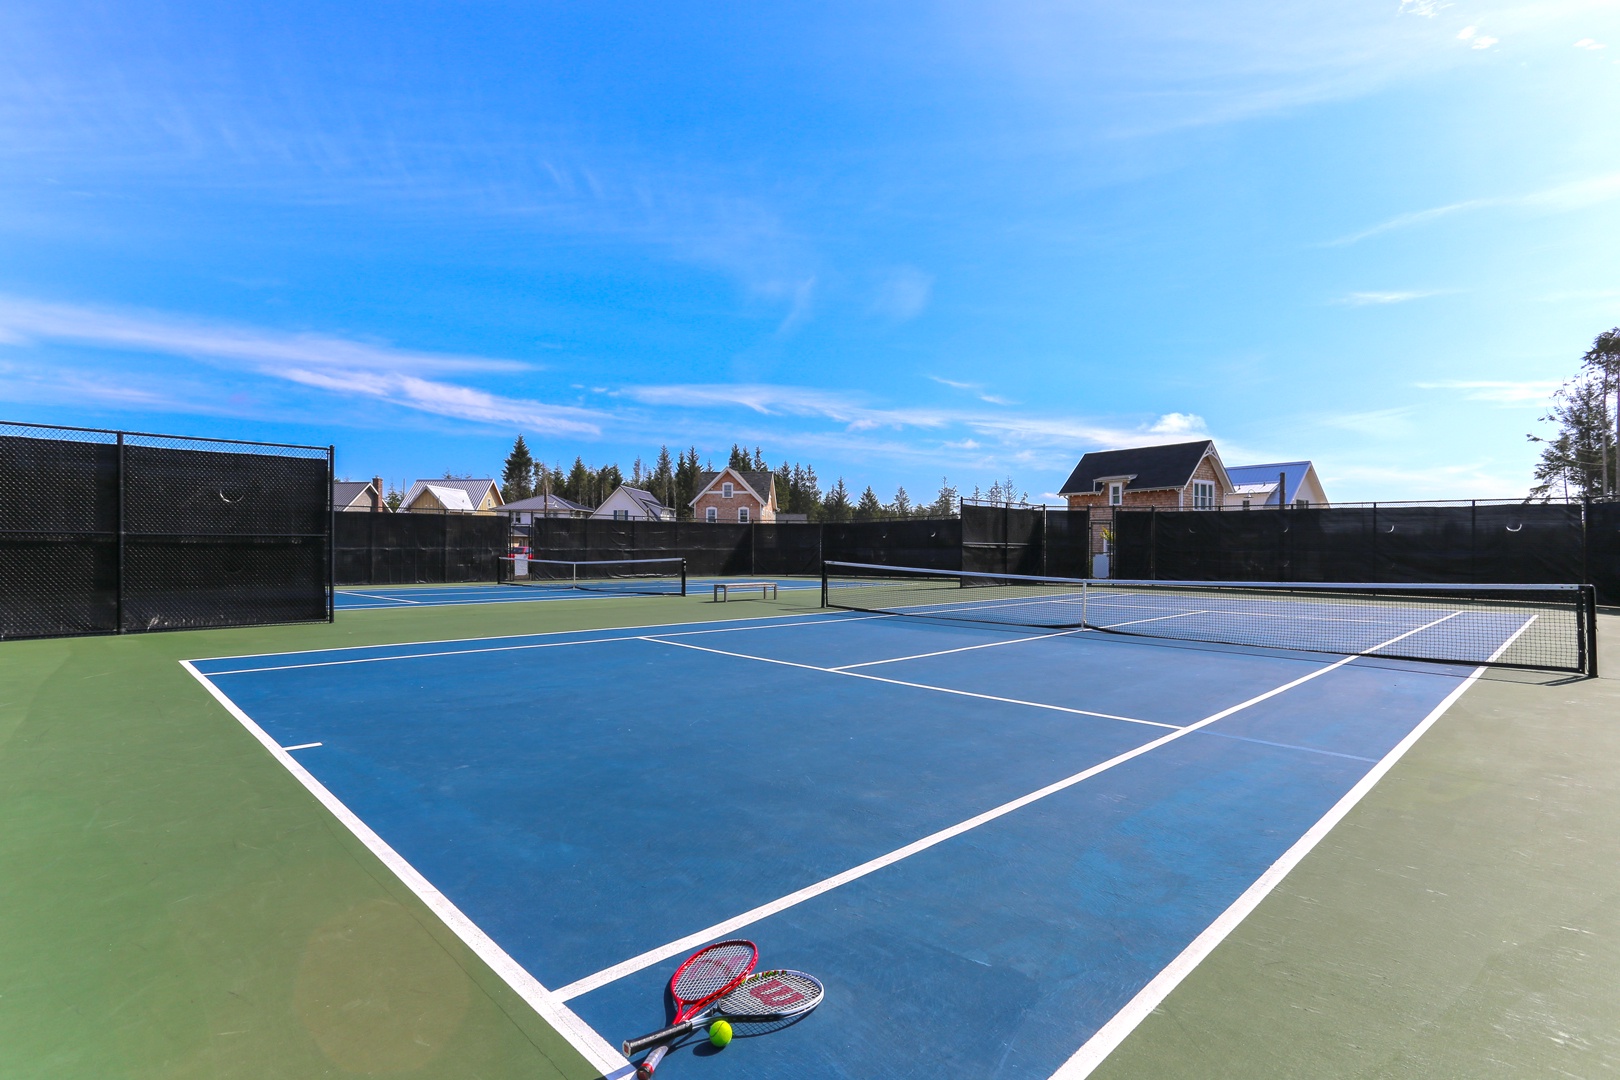 Make sure to pack your tennis racket on your next trip to Seabrook - 2 brand new tennis courts and pickle ball courts await in the Farm District	